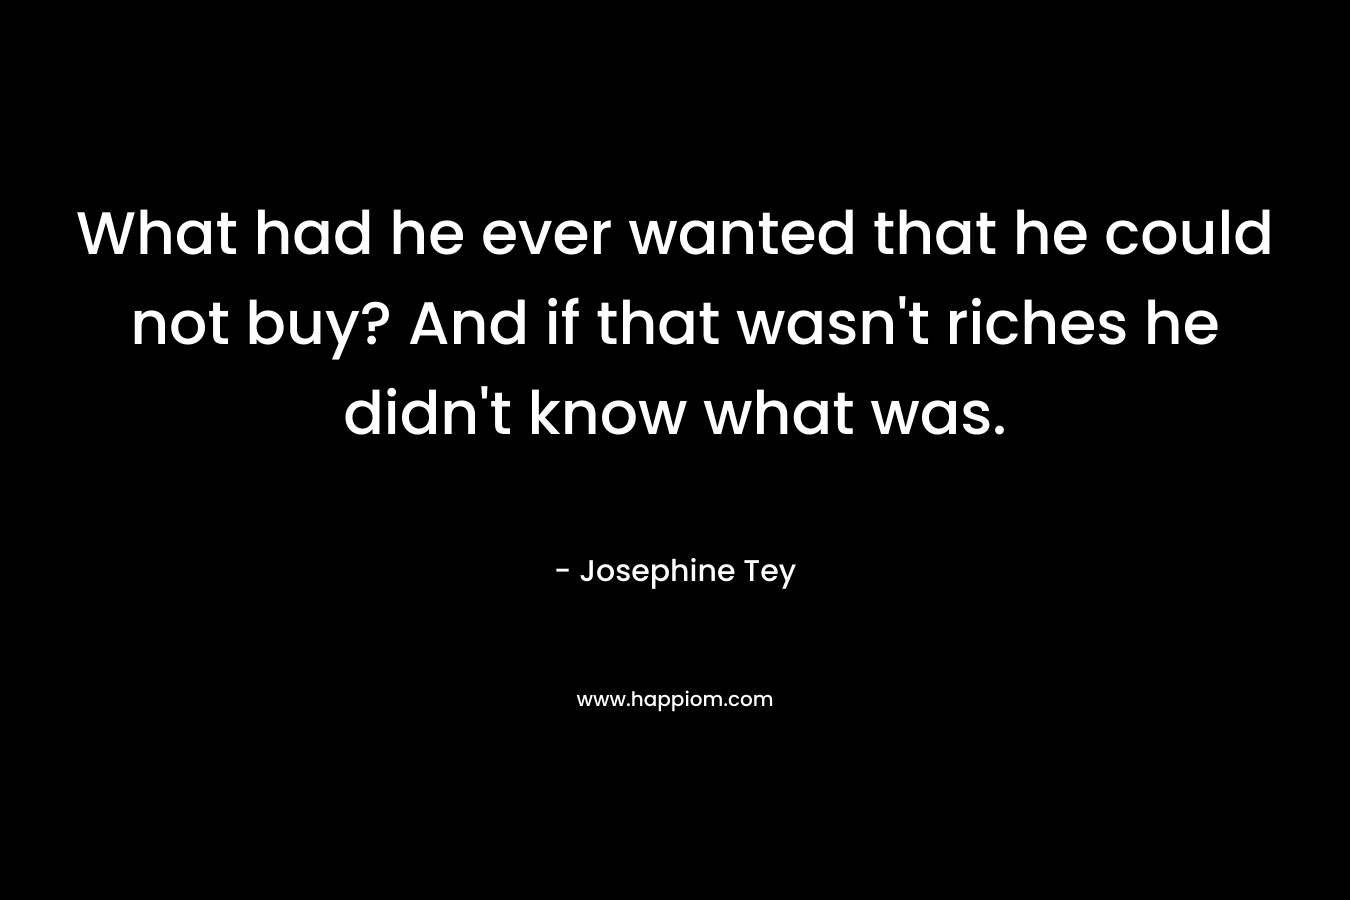 What had he ever wanted that he could not buy? And if that wasn't riches he didn't know what was.